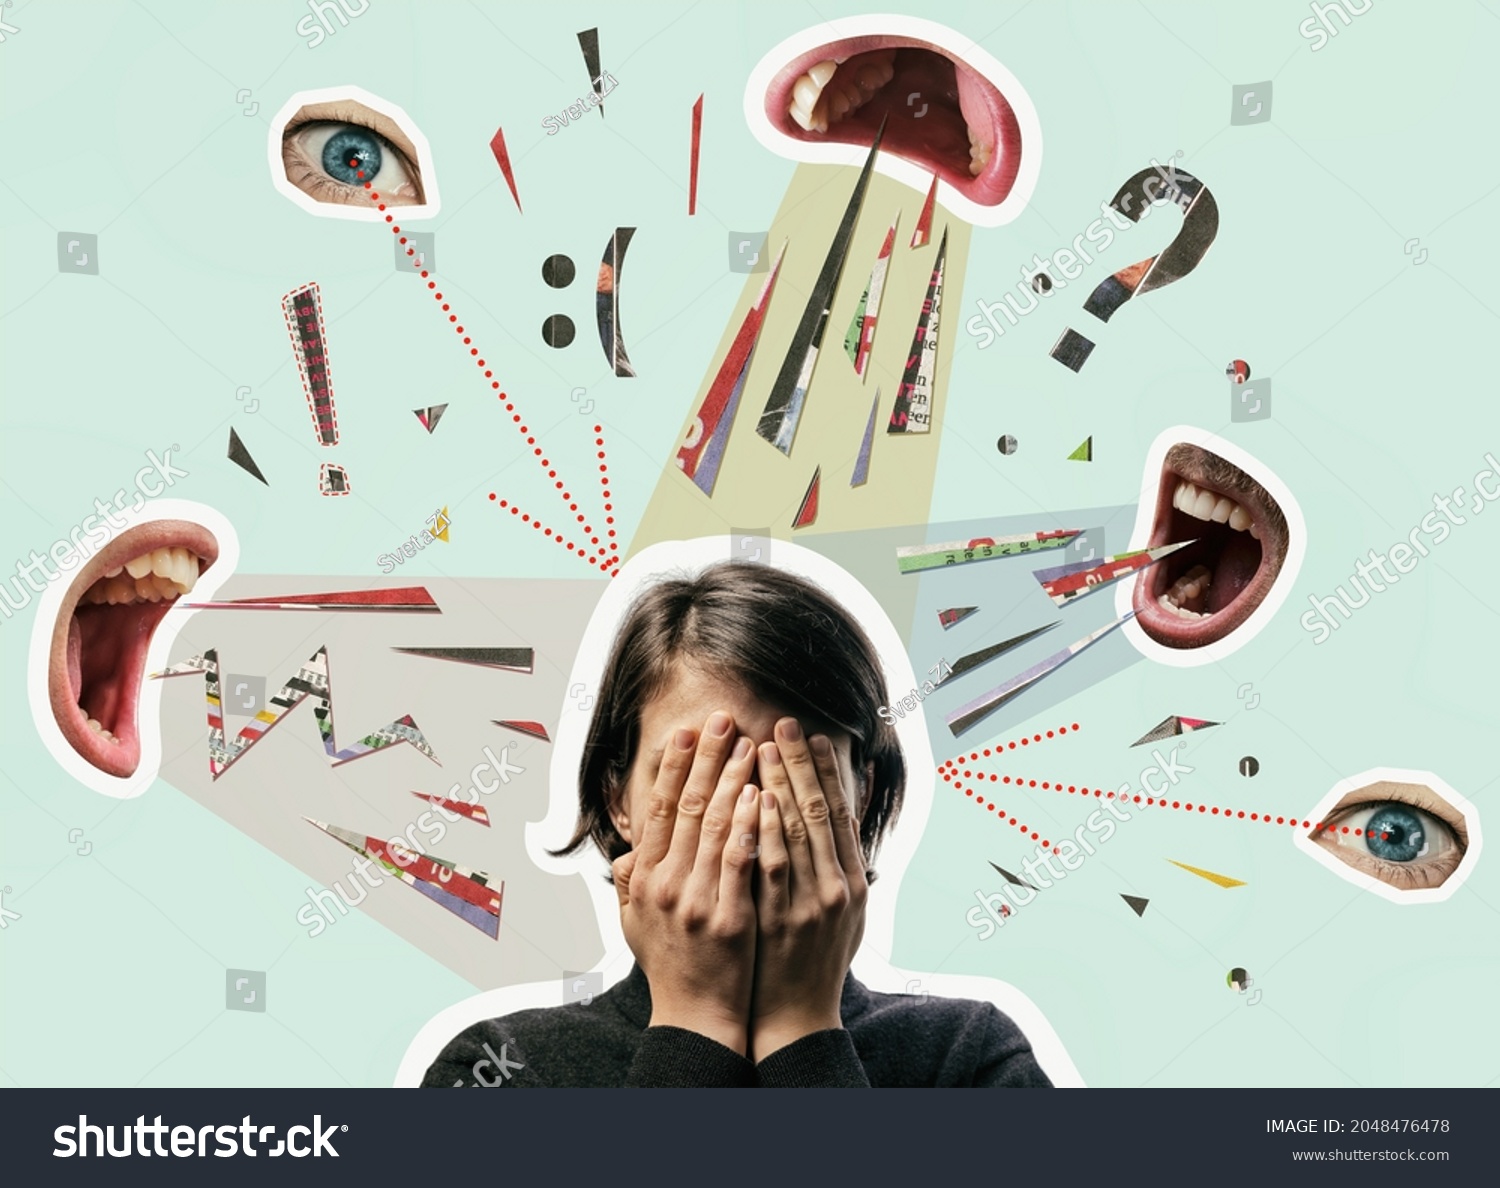 Collage with a woman covering her face and screaming mouths. Bullying, abuse, harassment. Concept. #2048476478